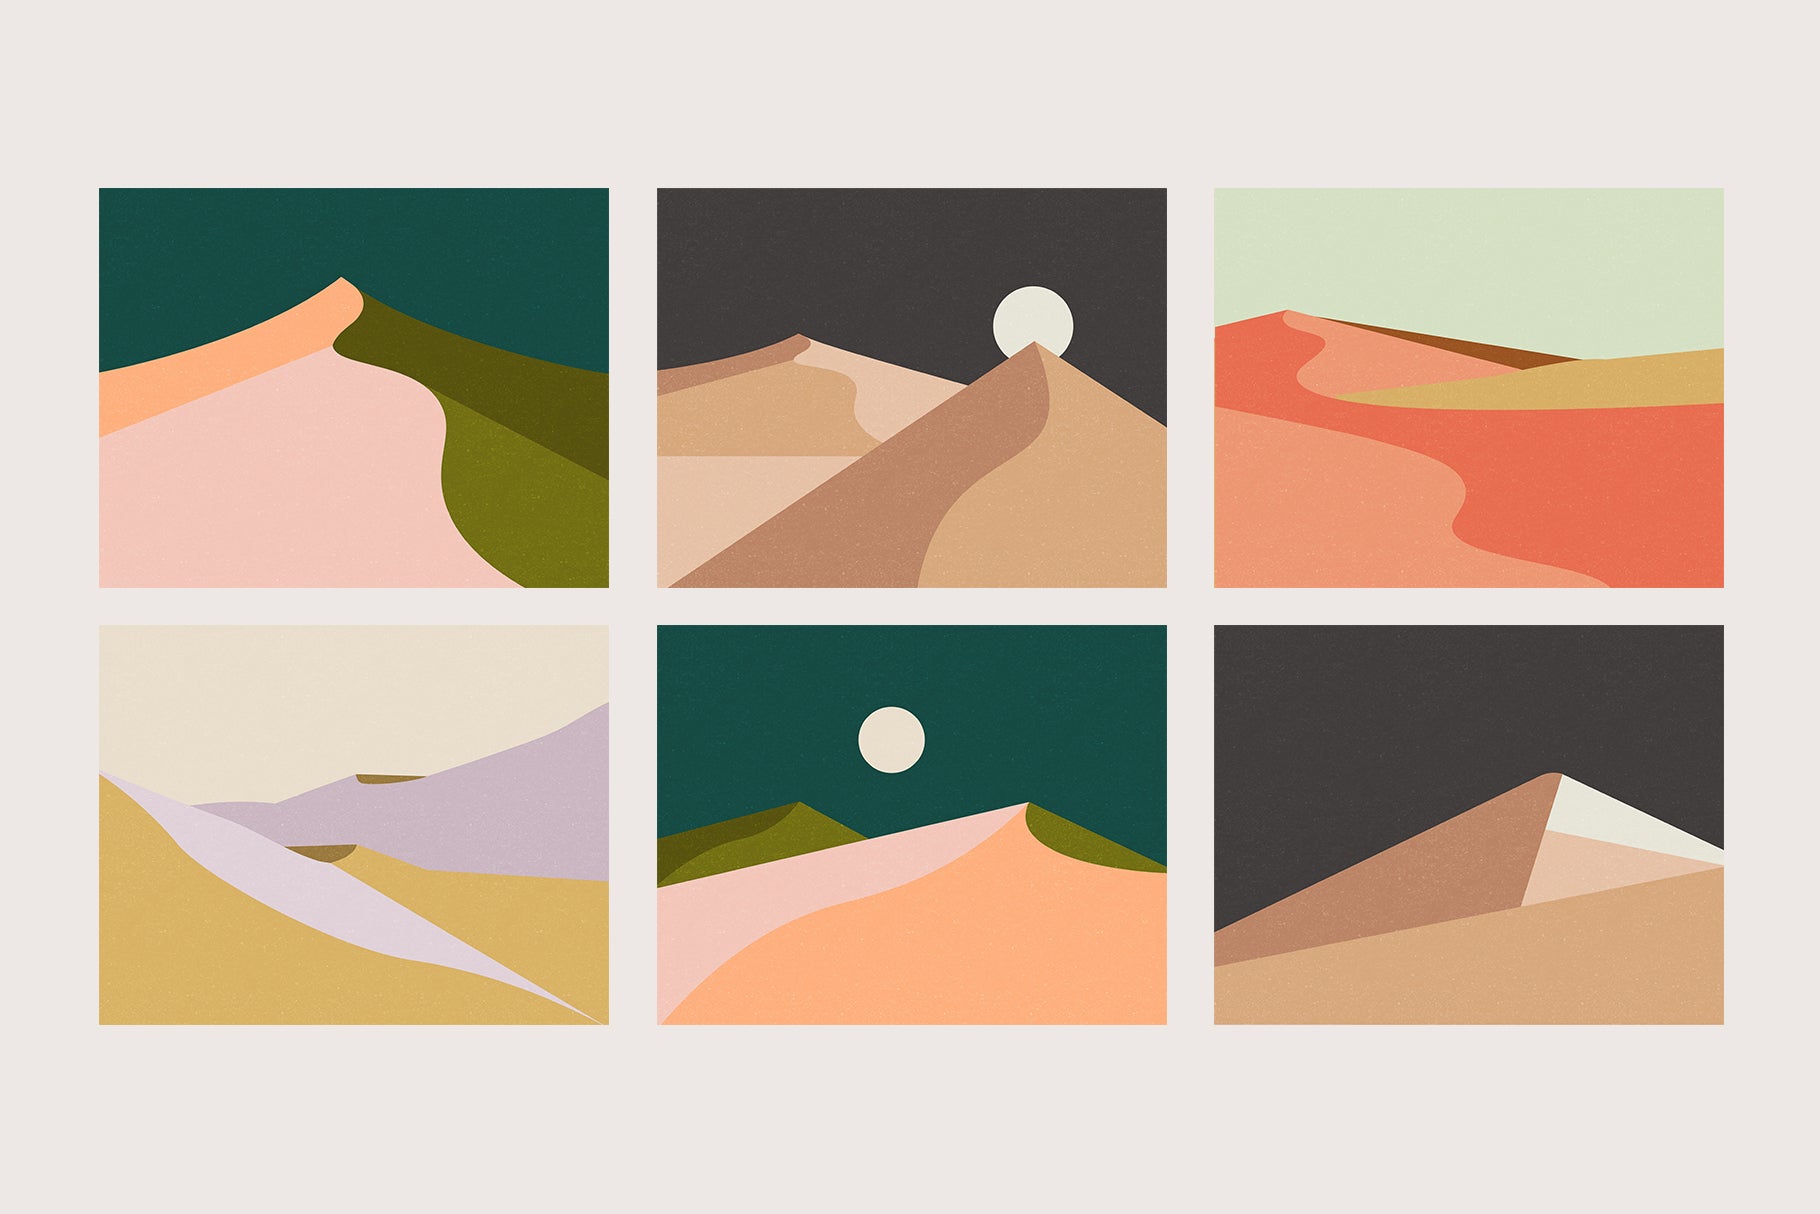 six vector illustrations showing mountains and hills